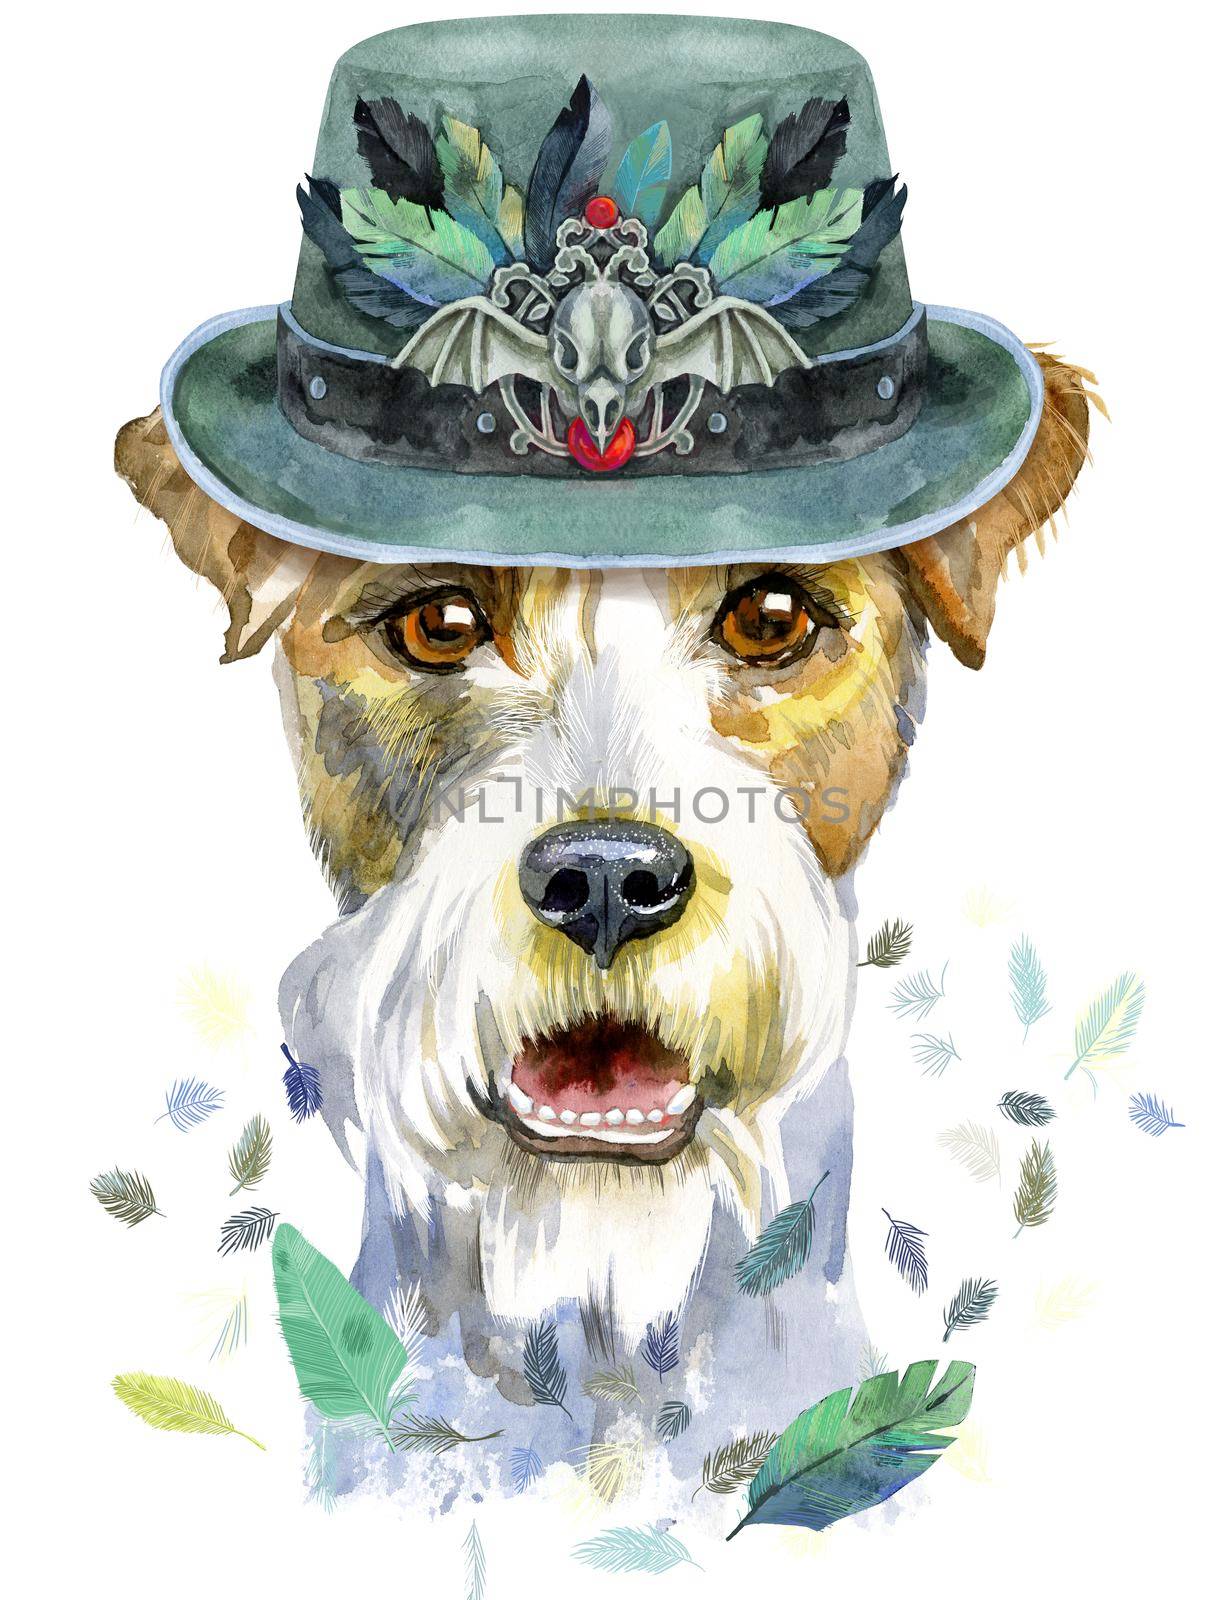 Cute Dog in olive hat with raven skull and feathers. Dog T-shirt graphics. watercolor airedale terrier illustration